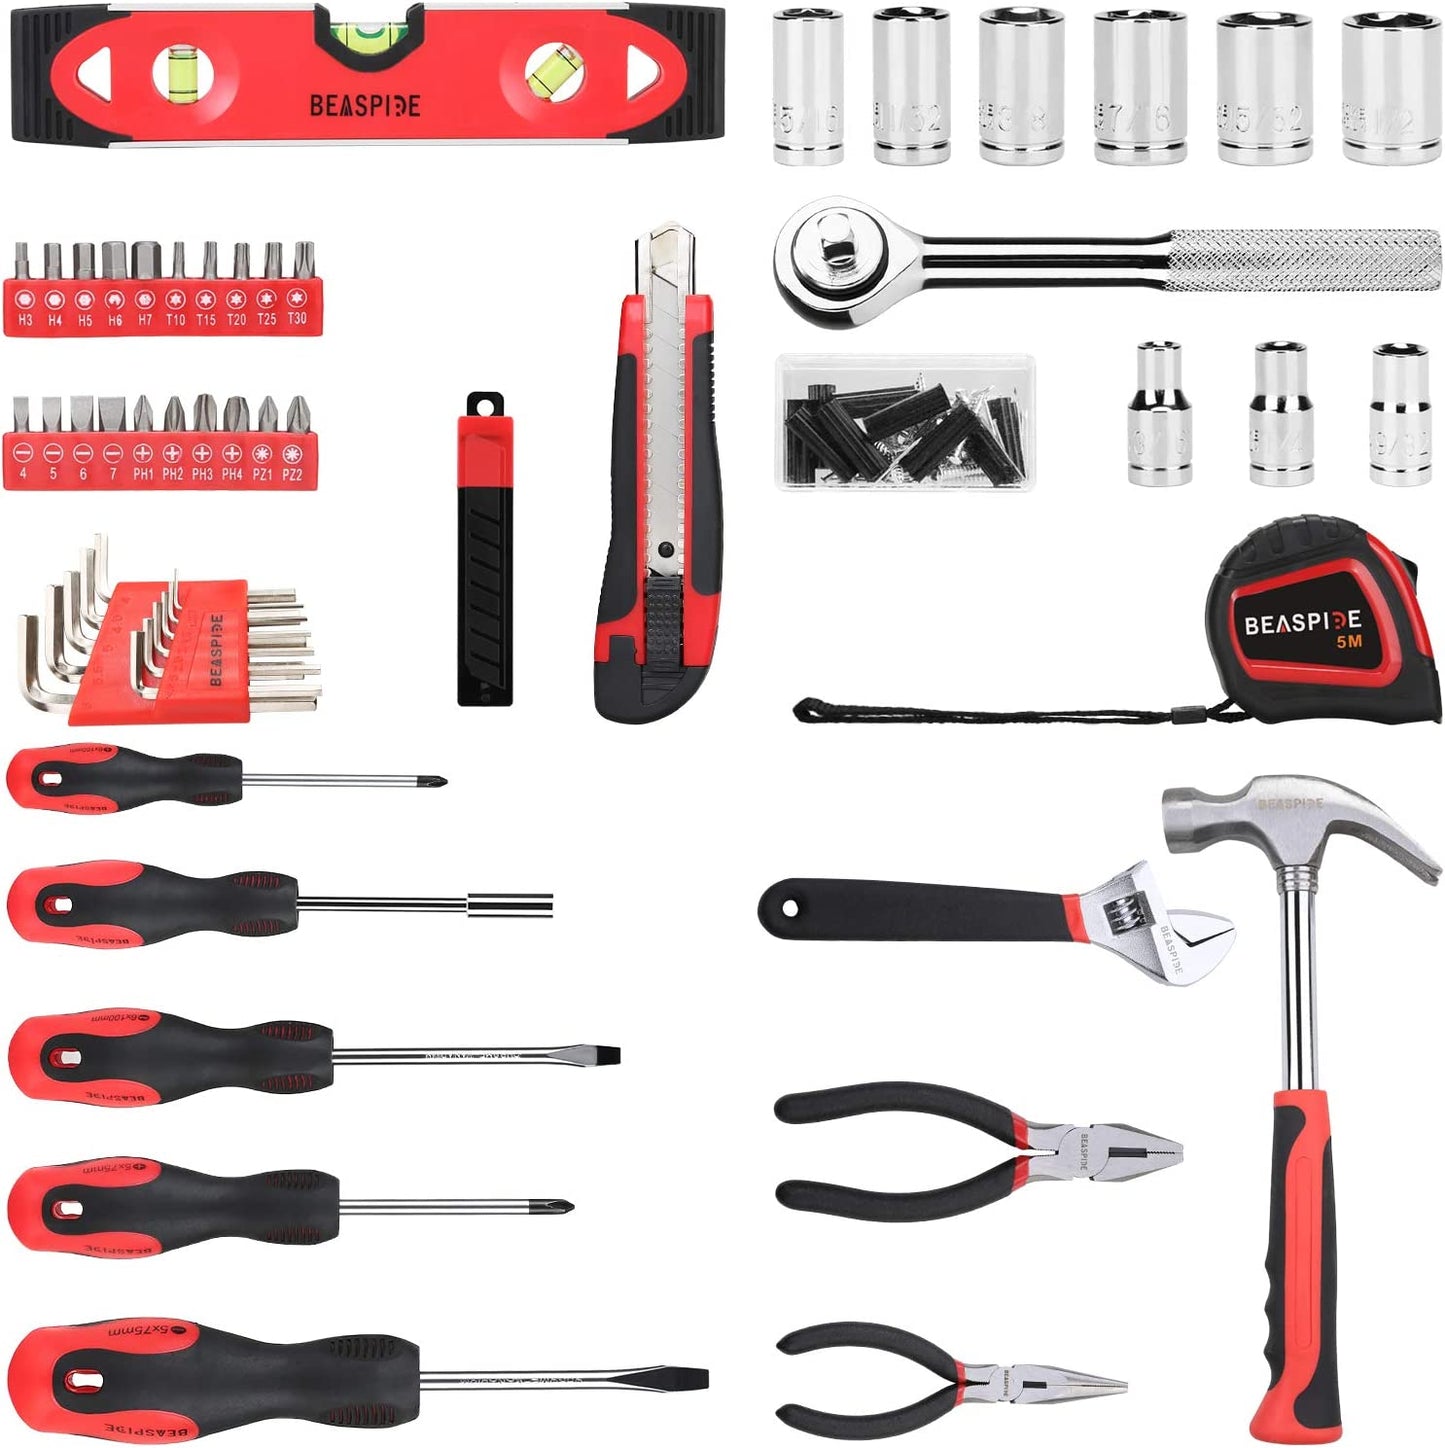 Beaspire 144 Piece Tool Set-General Household Hand Tool Kit, Complete Home Tool Kit for DIY, Auto Repair Tool Set, College Students, with Solid Toolbox